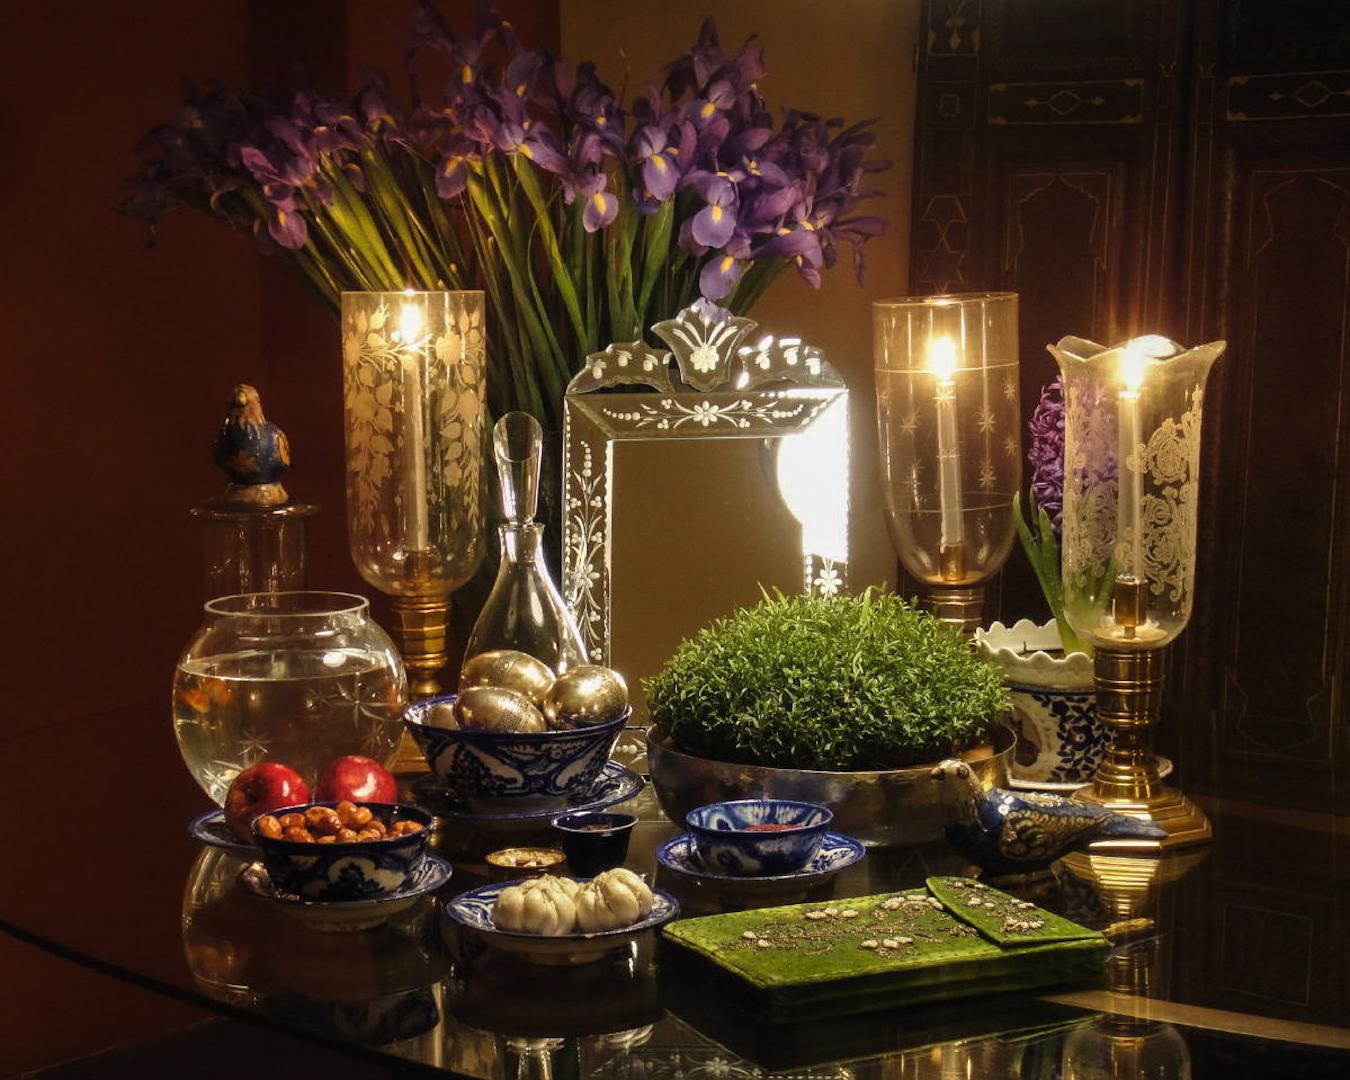 Photo of a Haft Sin, a traditional tabletop decoration that is formed from seven symbolic items.